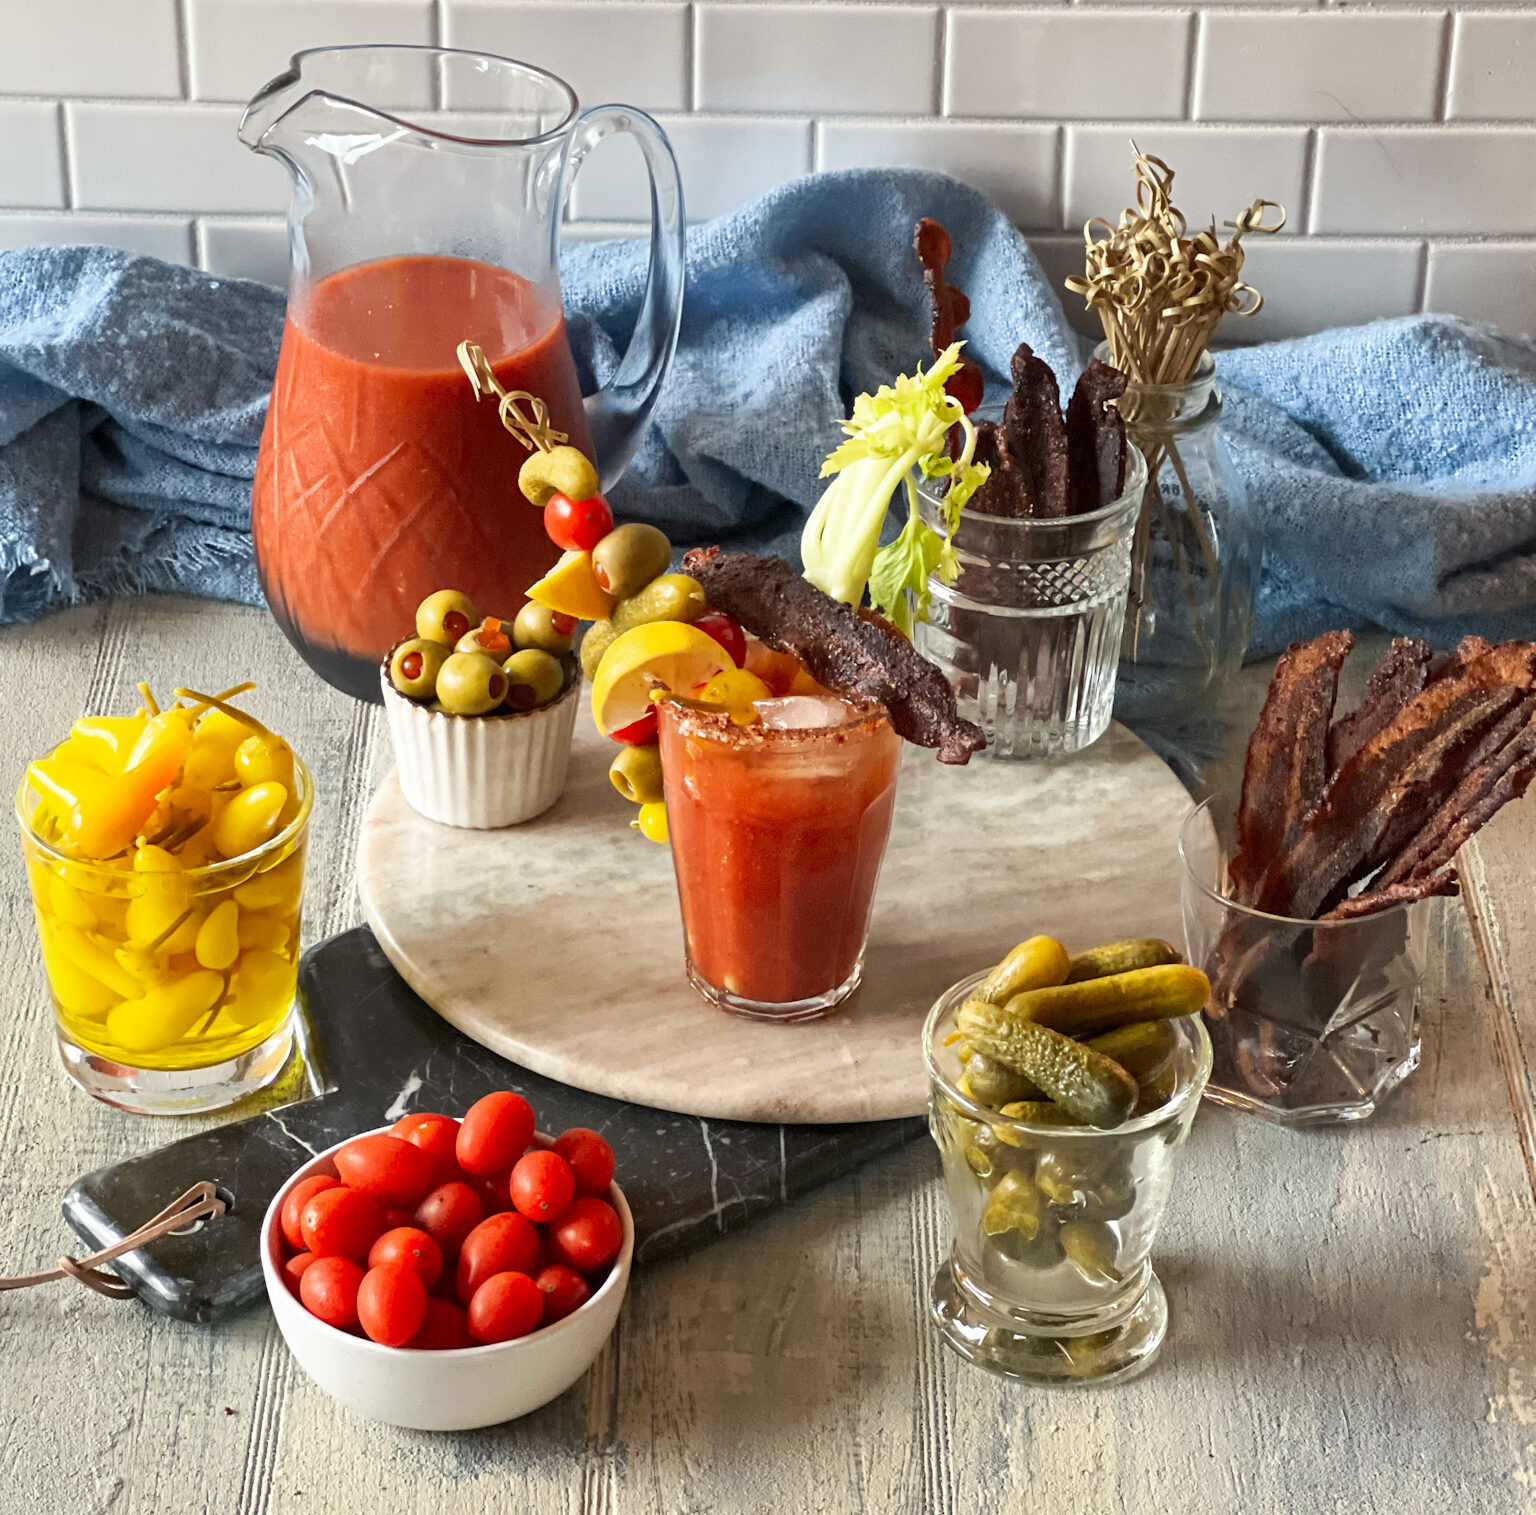 The Ultimate Bloody Mary Bar - Crowded Kitchen